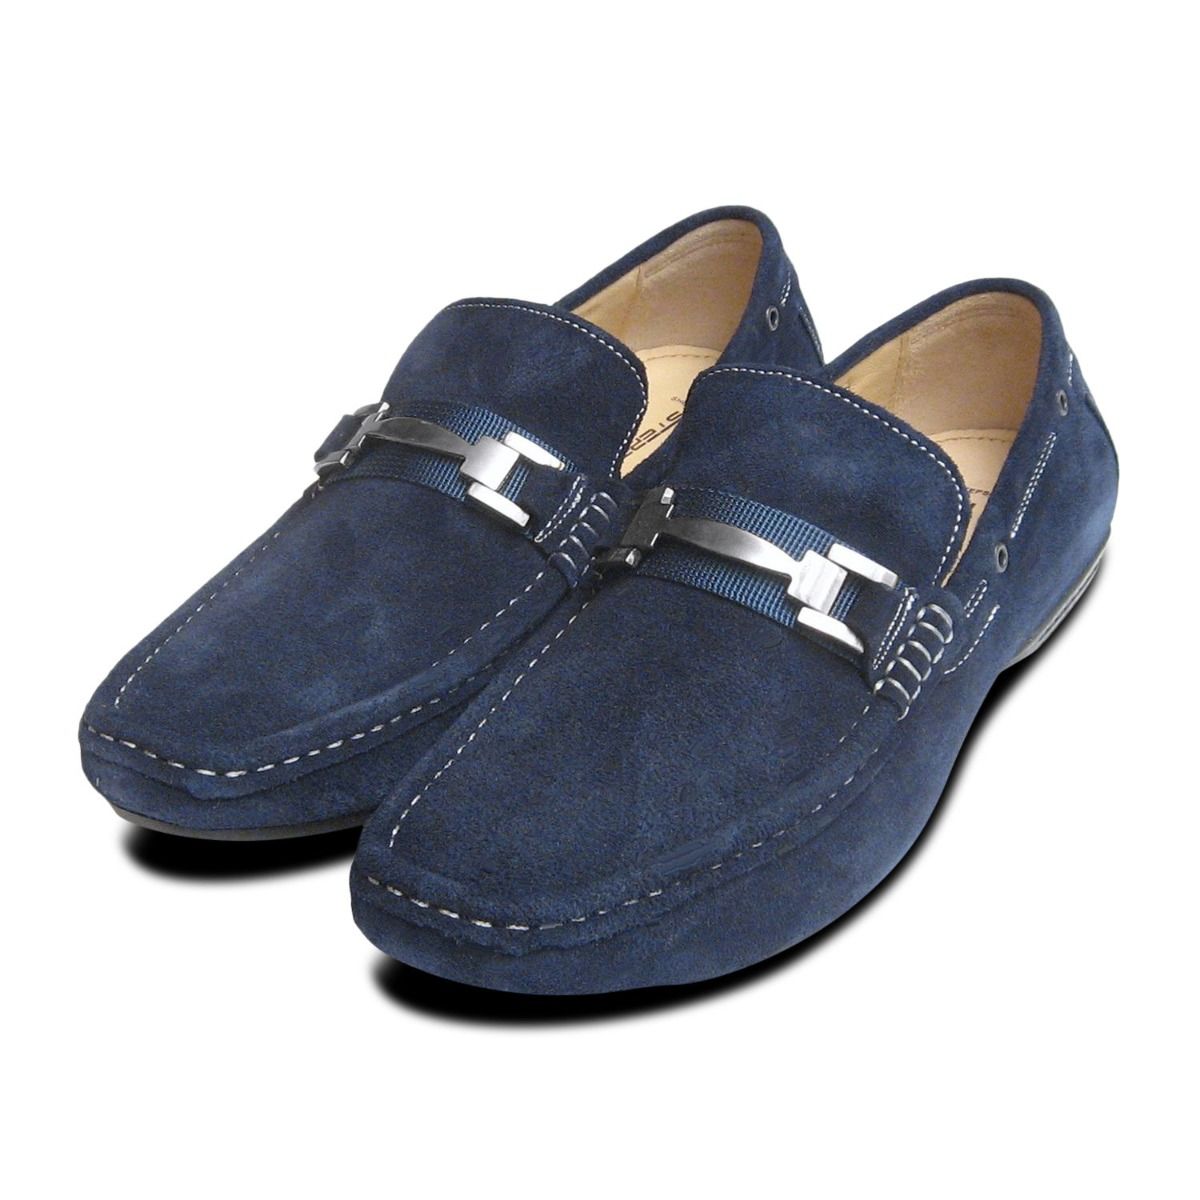 Designer Navy Blue Suede Loafers by Steptronic Delta Shoes